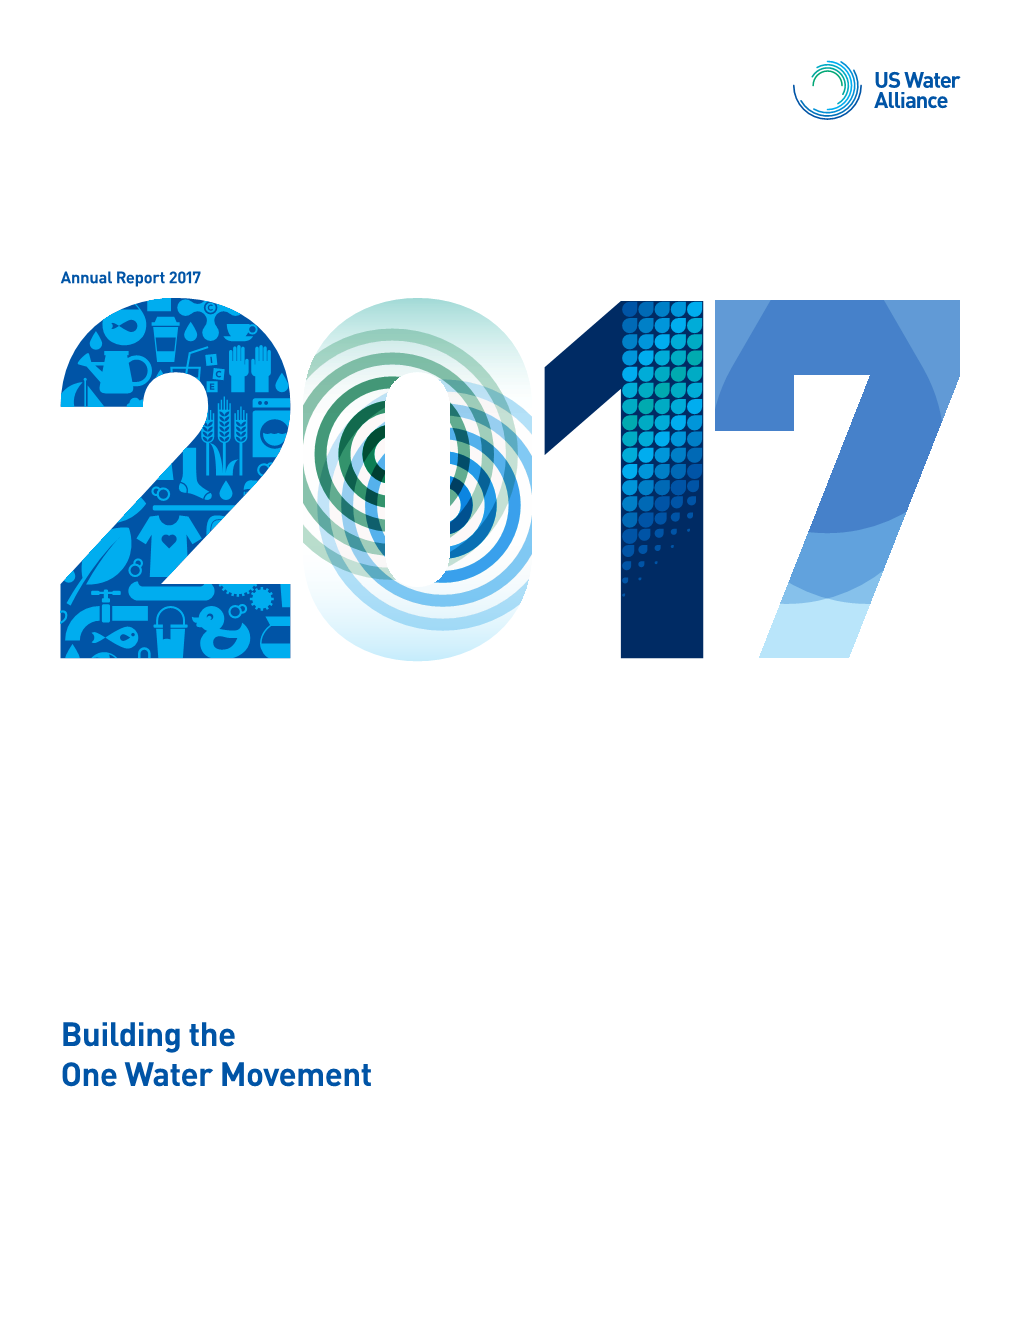 Building the One Water Movement